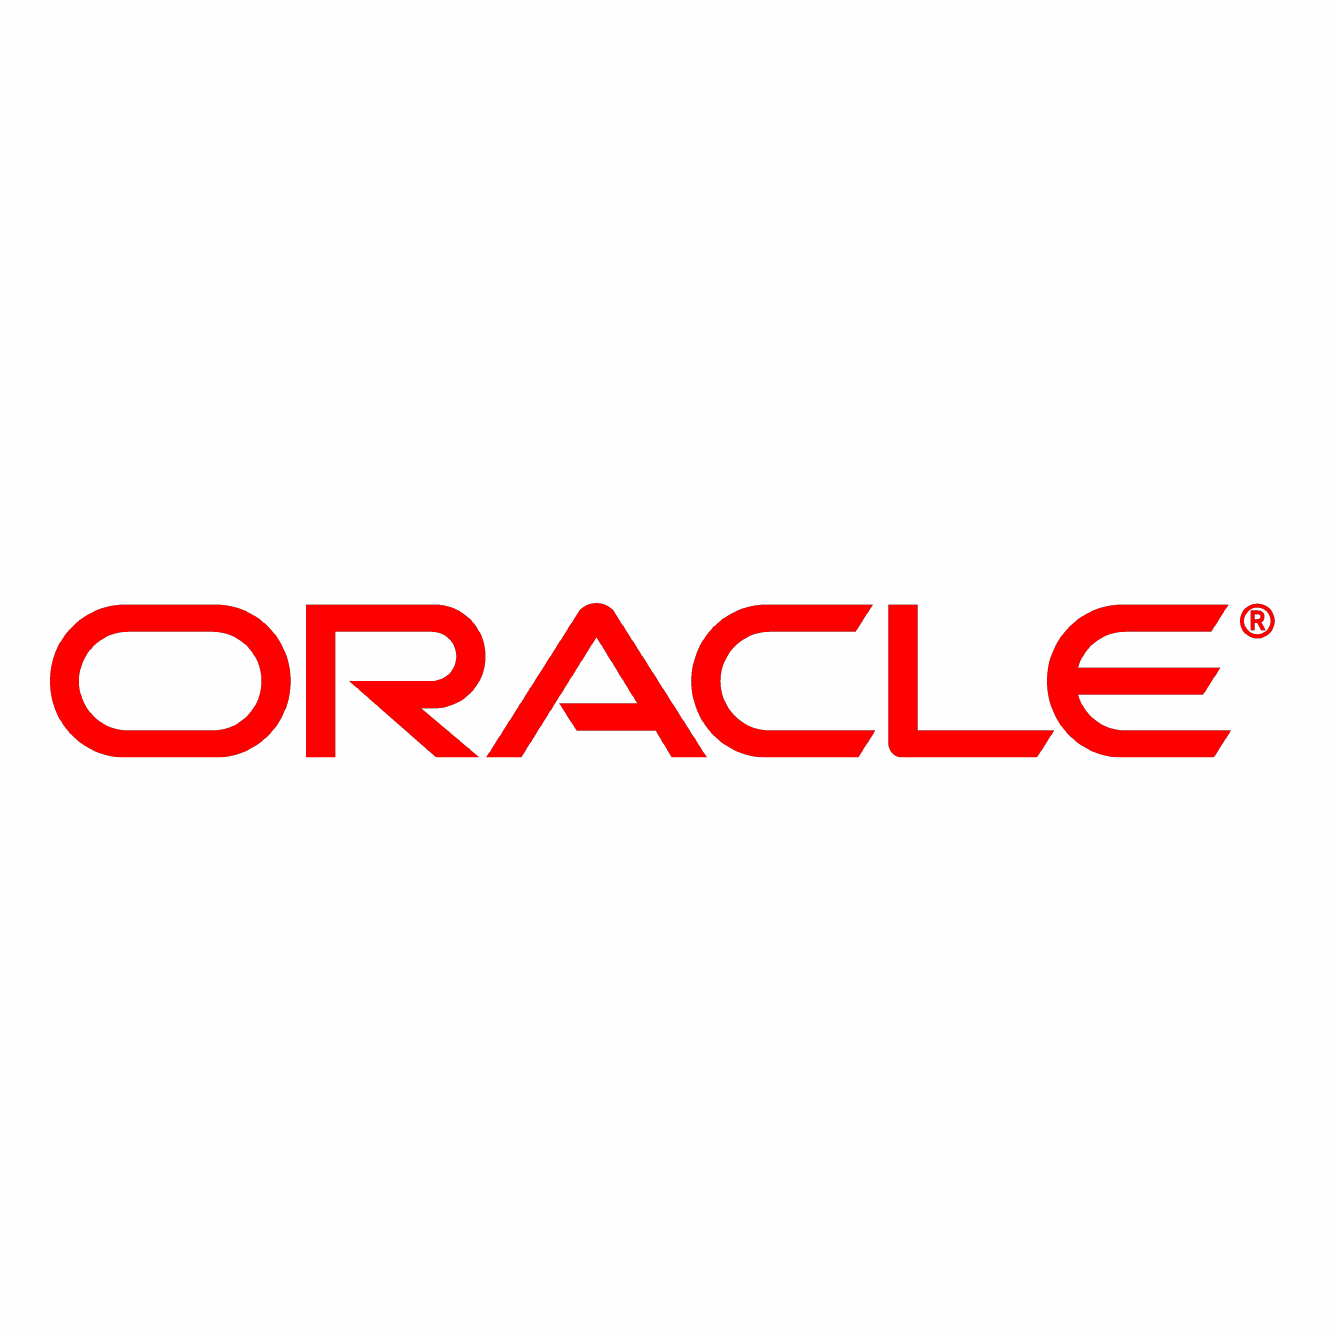 https://securetech.ae/wp-content/uploads/2019/02/19.ORACLE.png